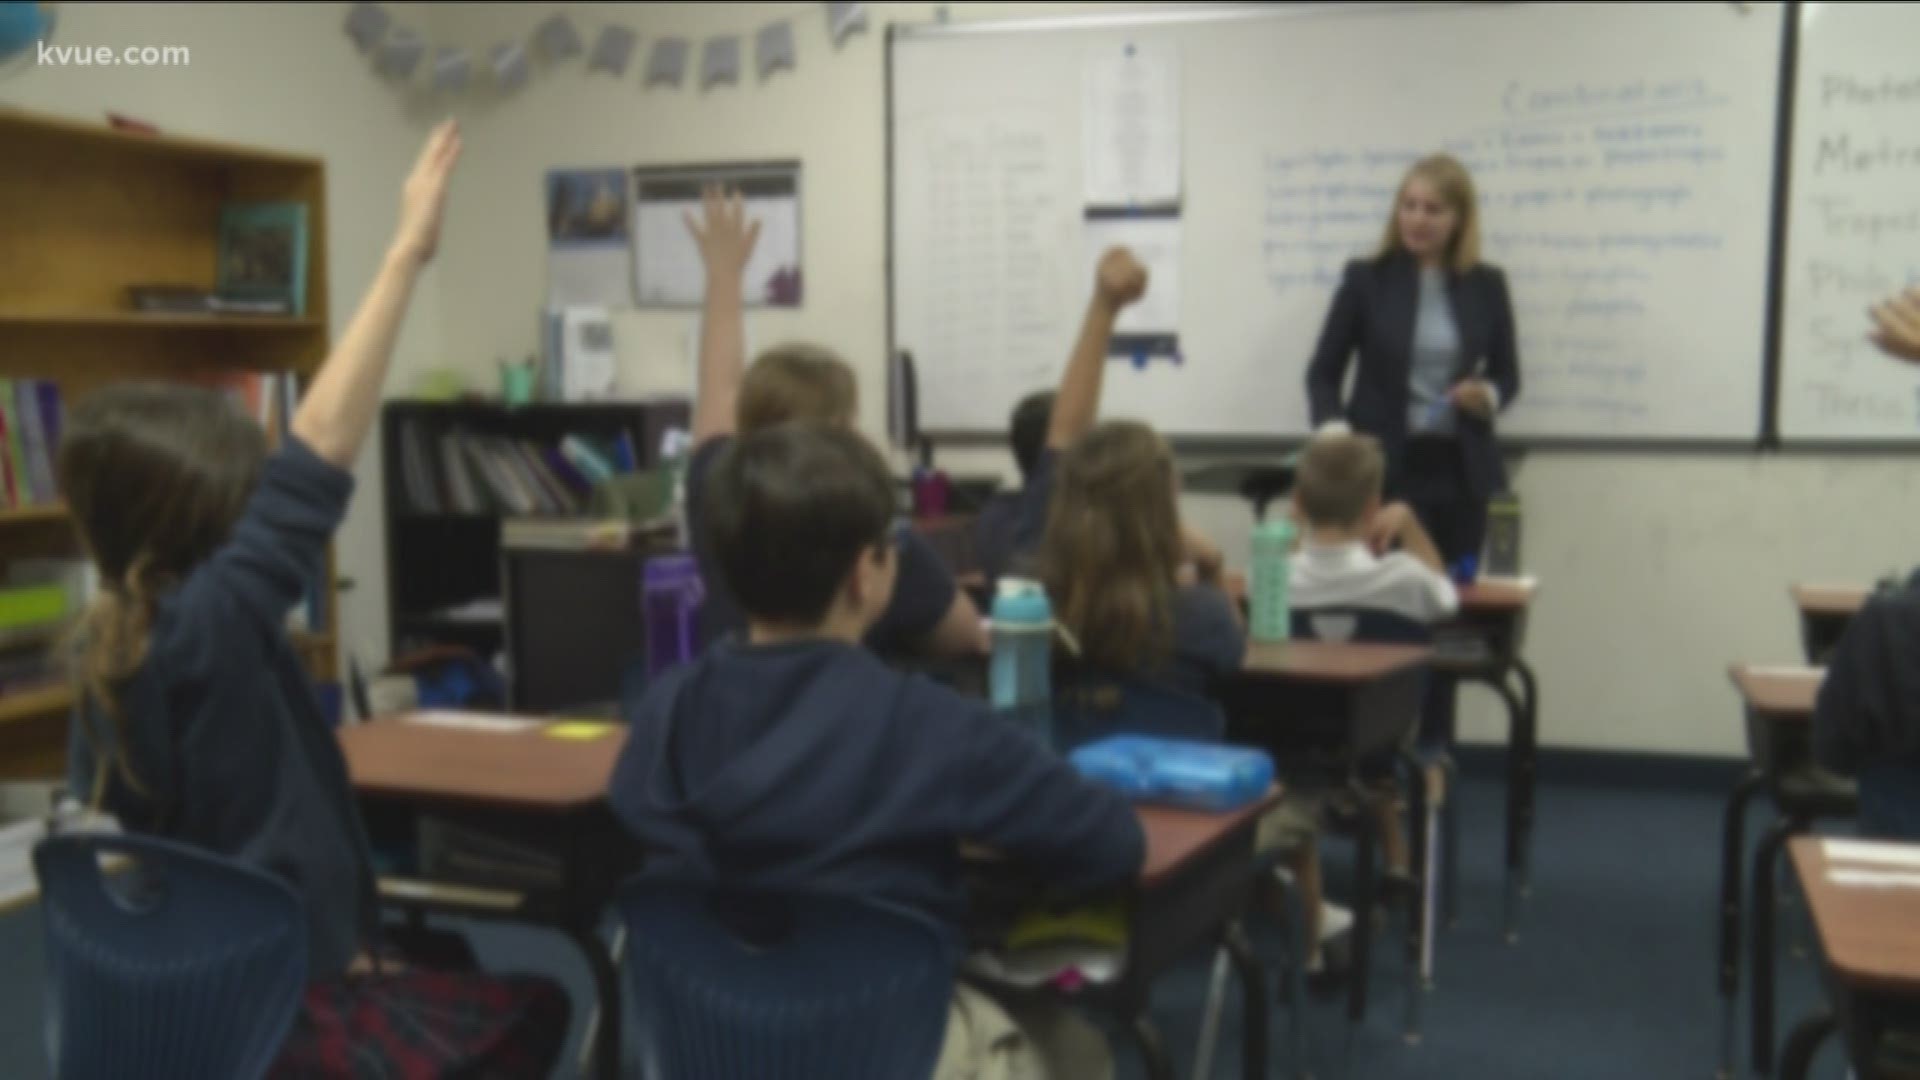 School is officially back in session and that means fundraisers are coming. Here with tips on school fundraising is Carlos Villalobos with the Better Business Bureau.